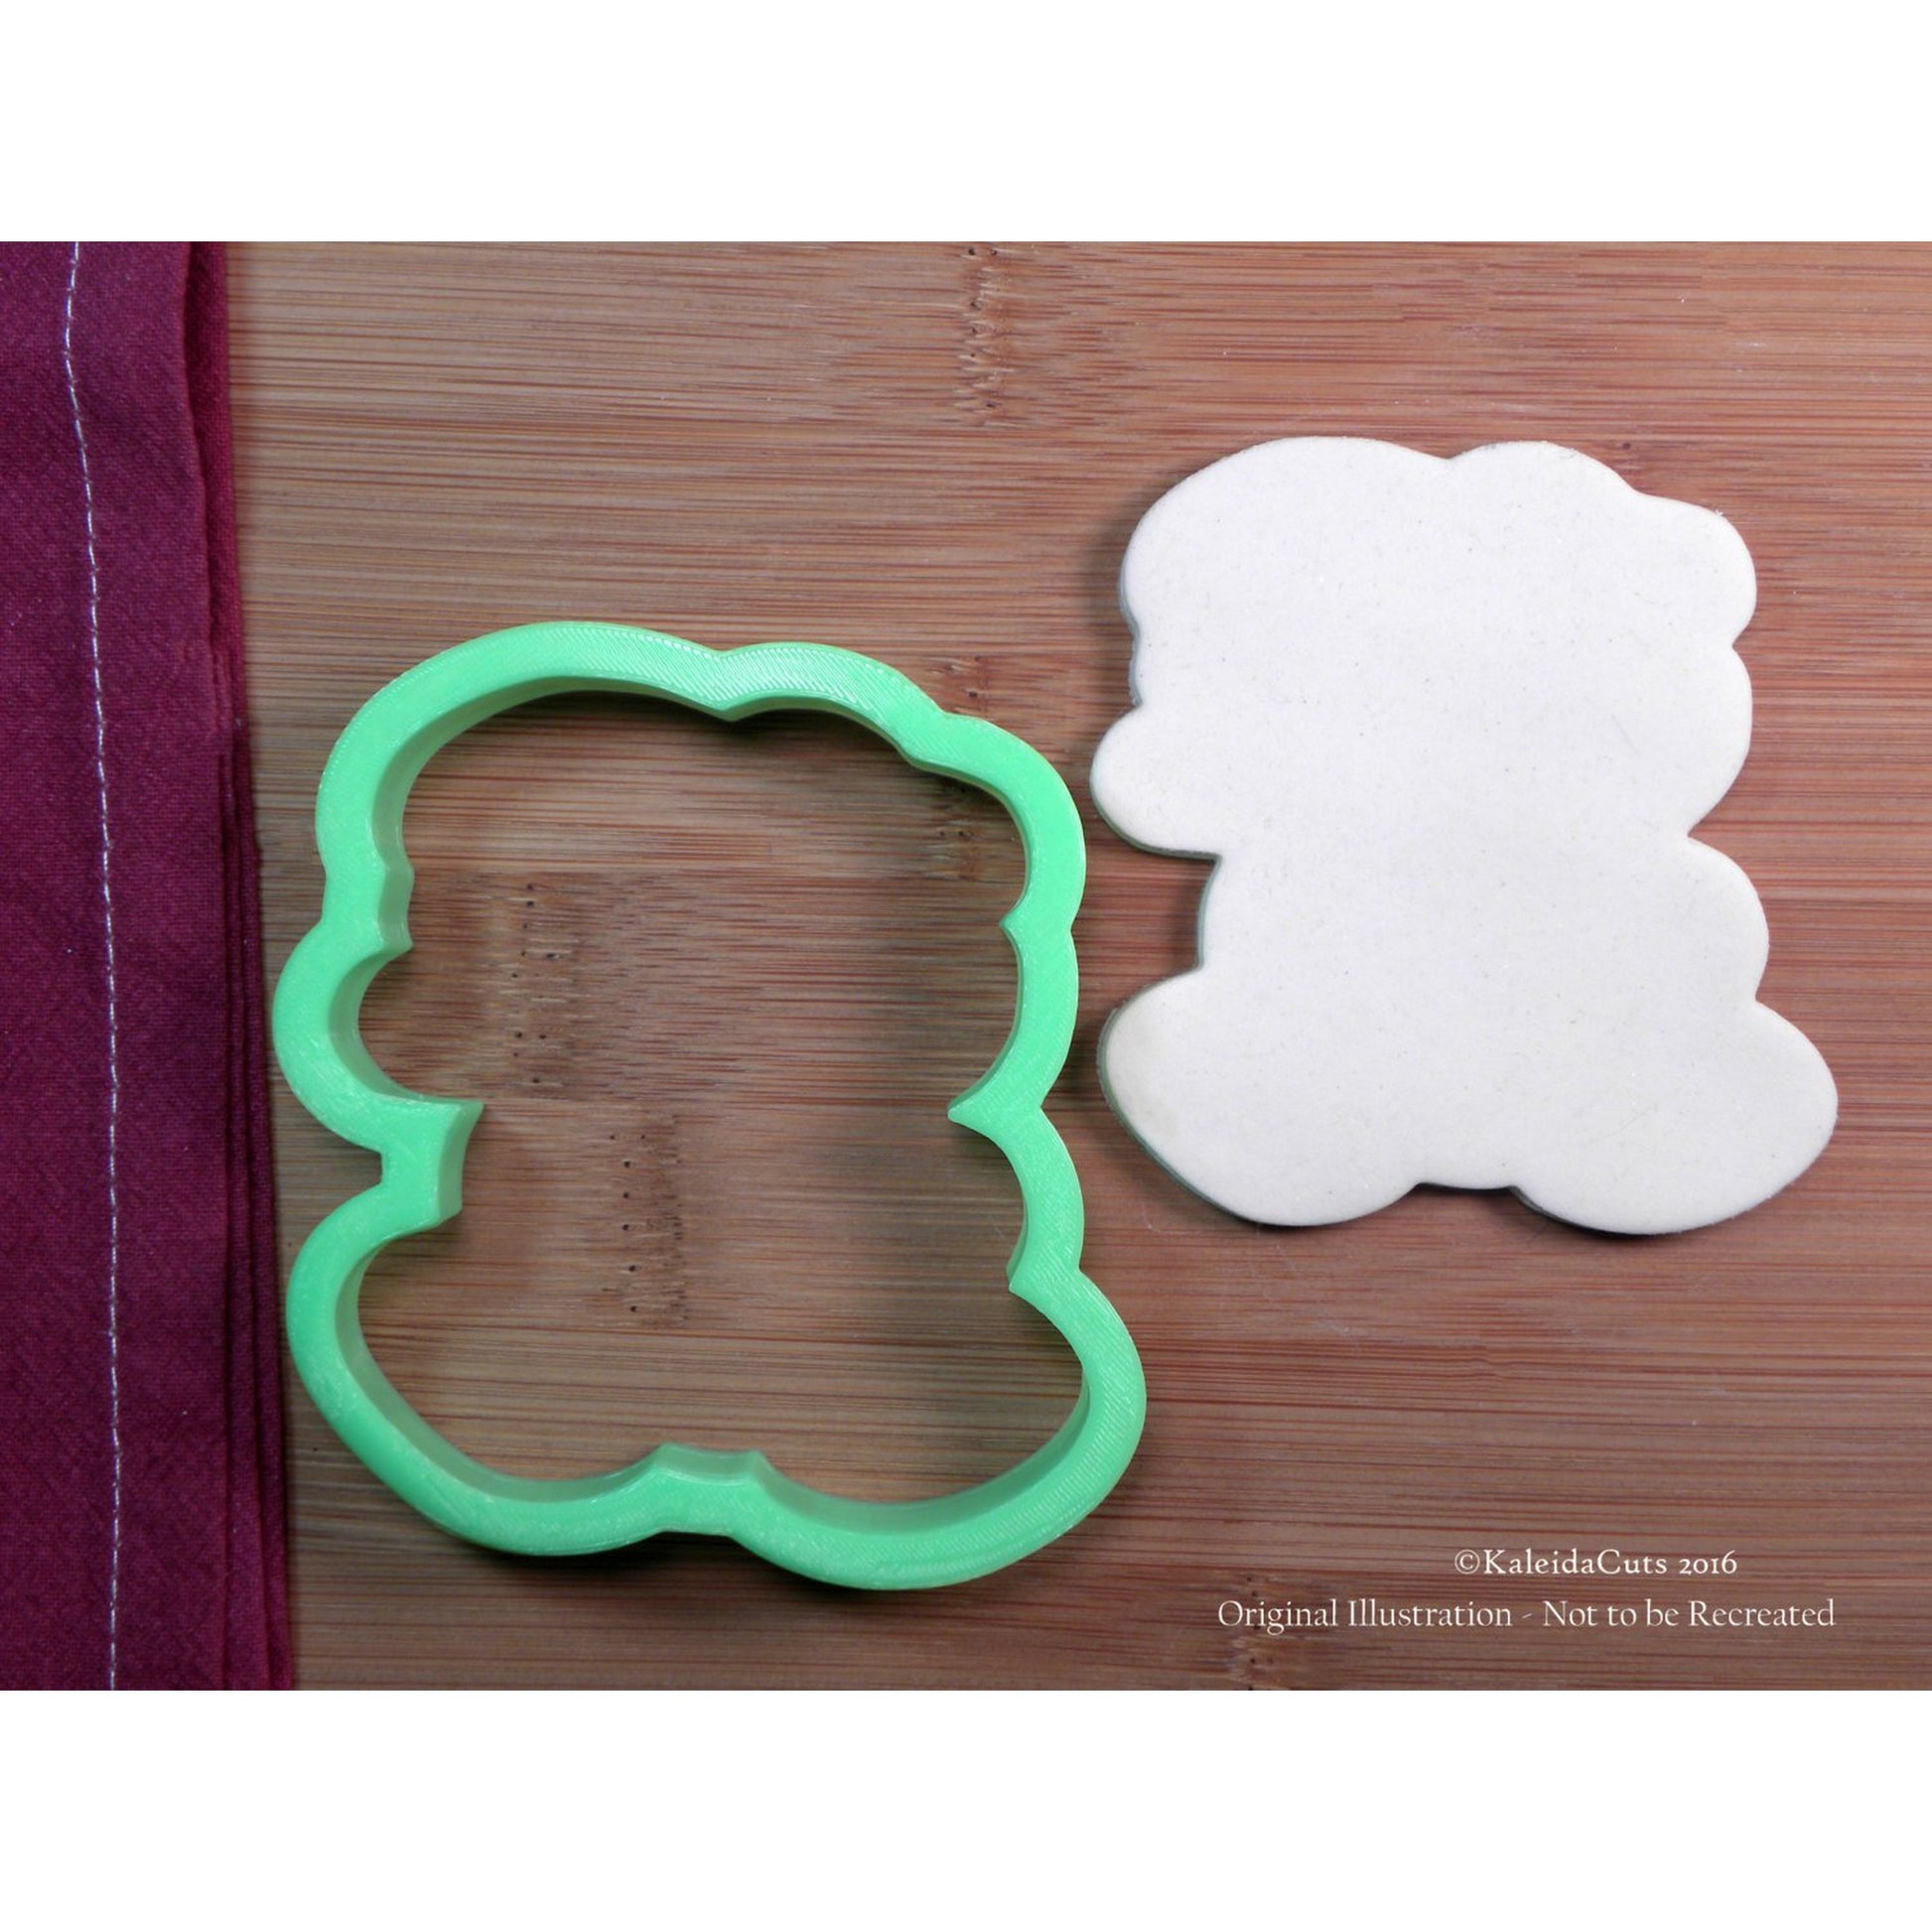 Sitting Gingy (Santa, Snowman) Cookie Cutter